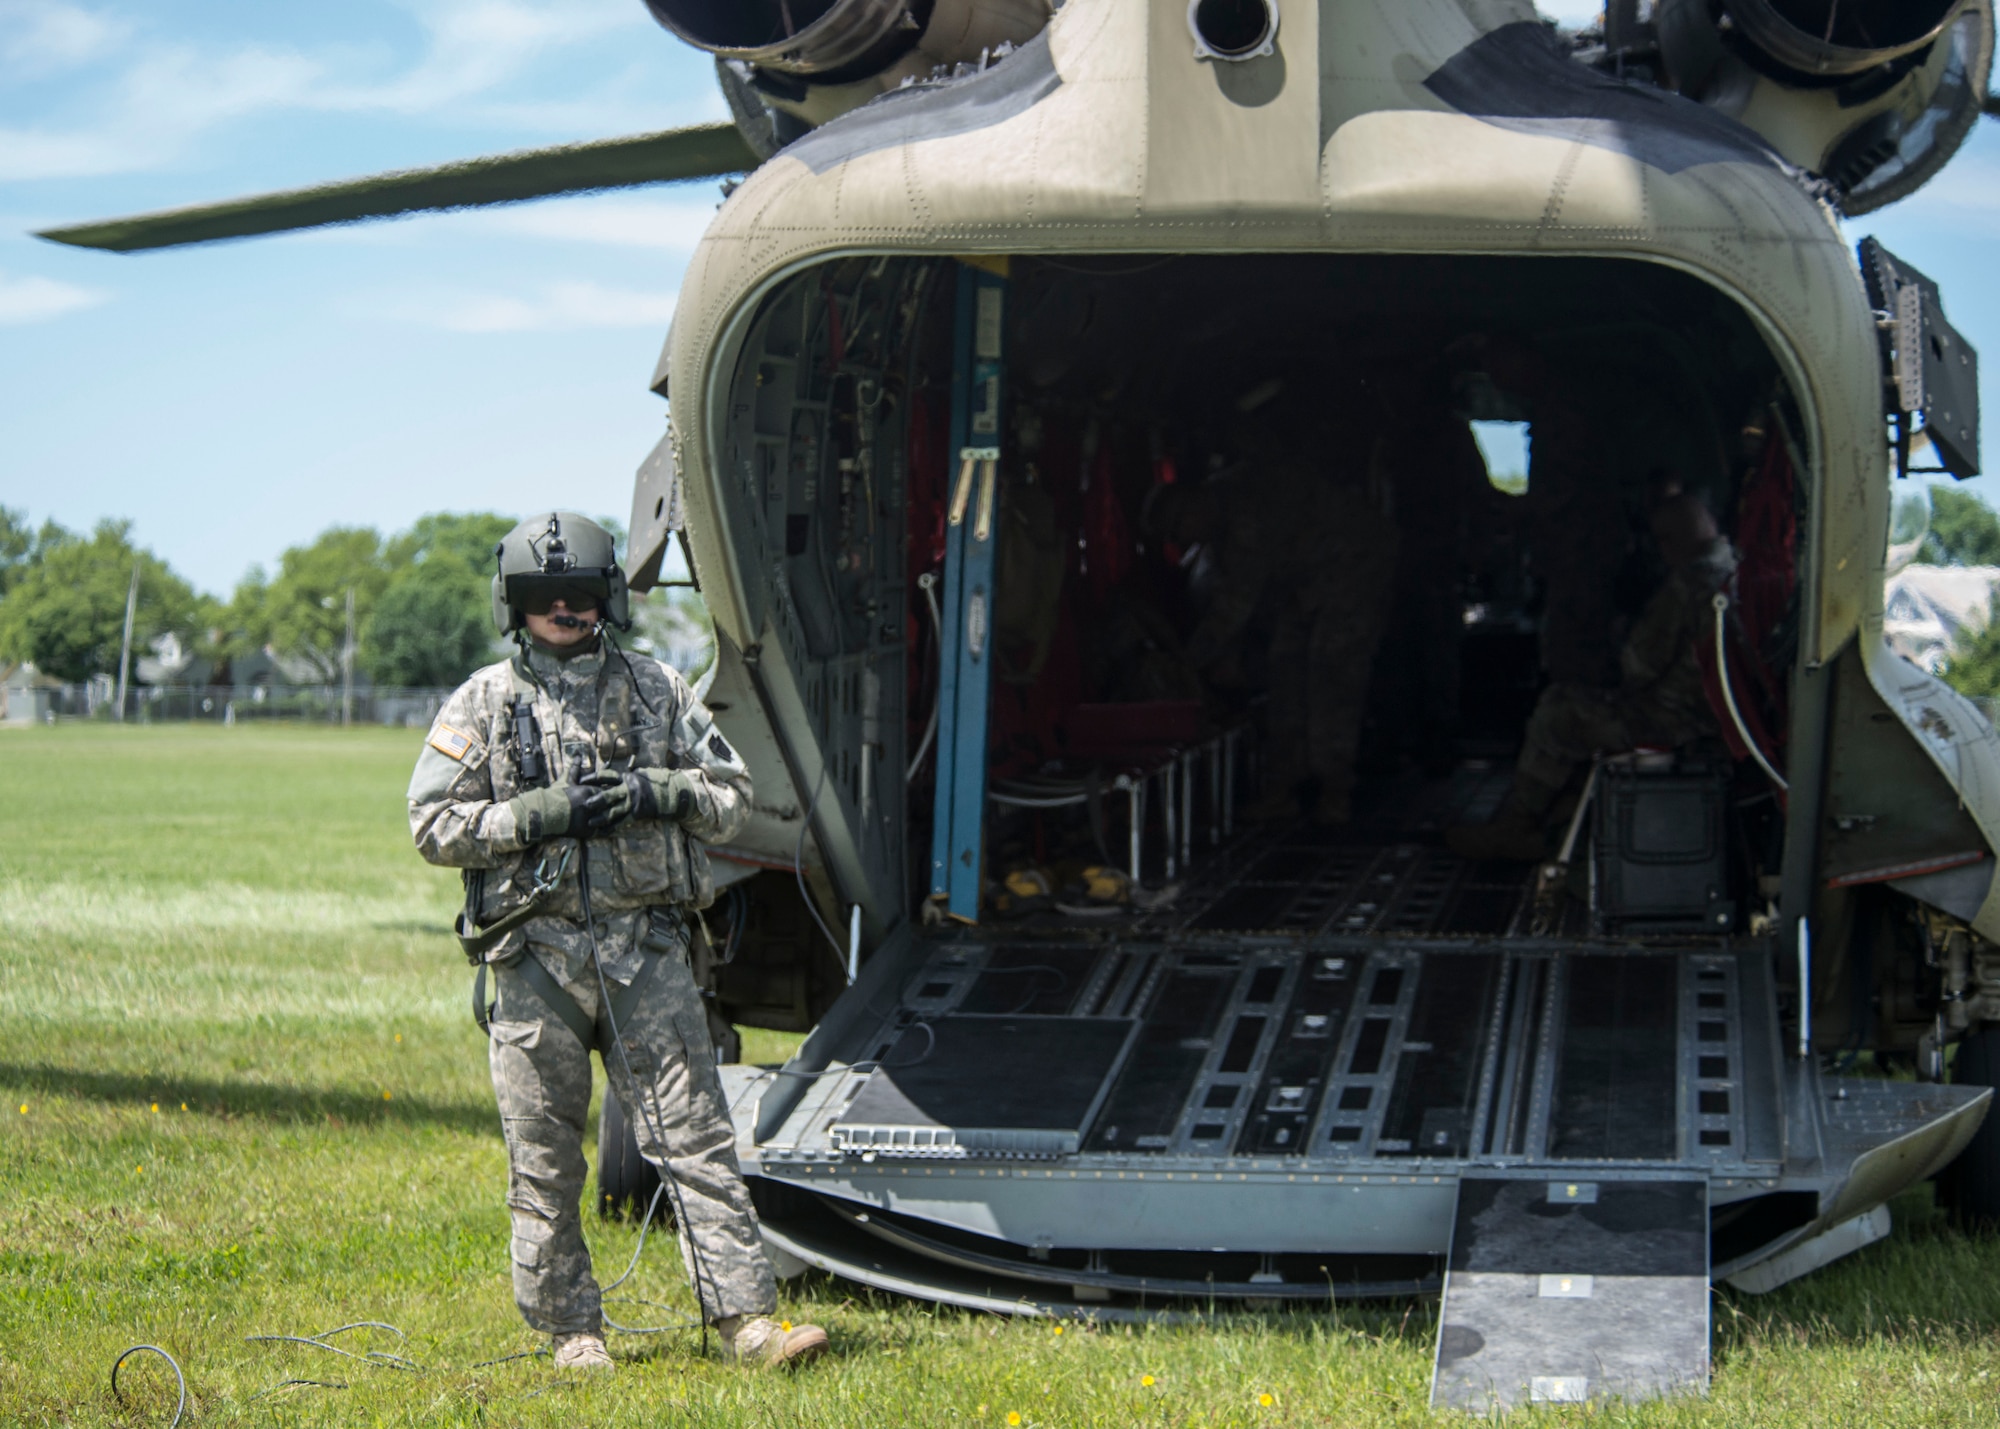 A Connecticut Army National Guard aviation specialist prepares to usher passengers onto a CH-47 Chinook during an annual training exercise, June 11, 2018 in Sea Girt, N.J. (Air National Guard photo by Tech. Sgt. Tamara R. Dabney)